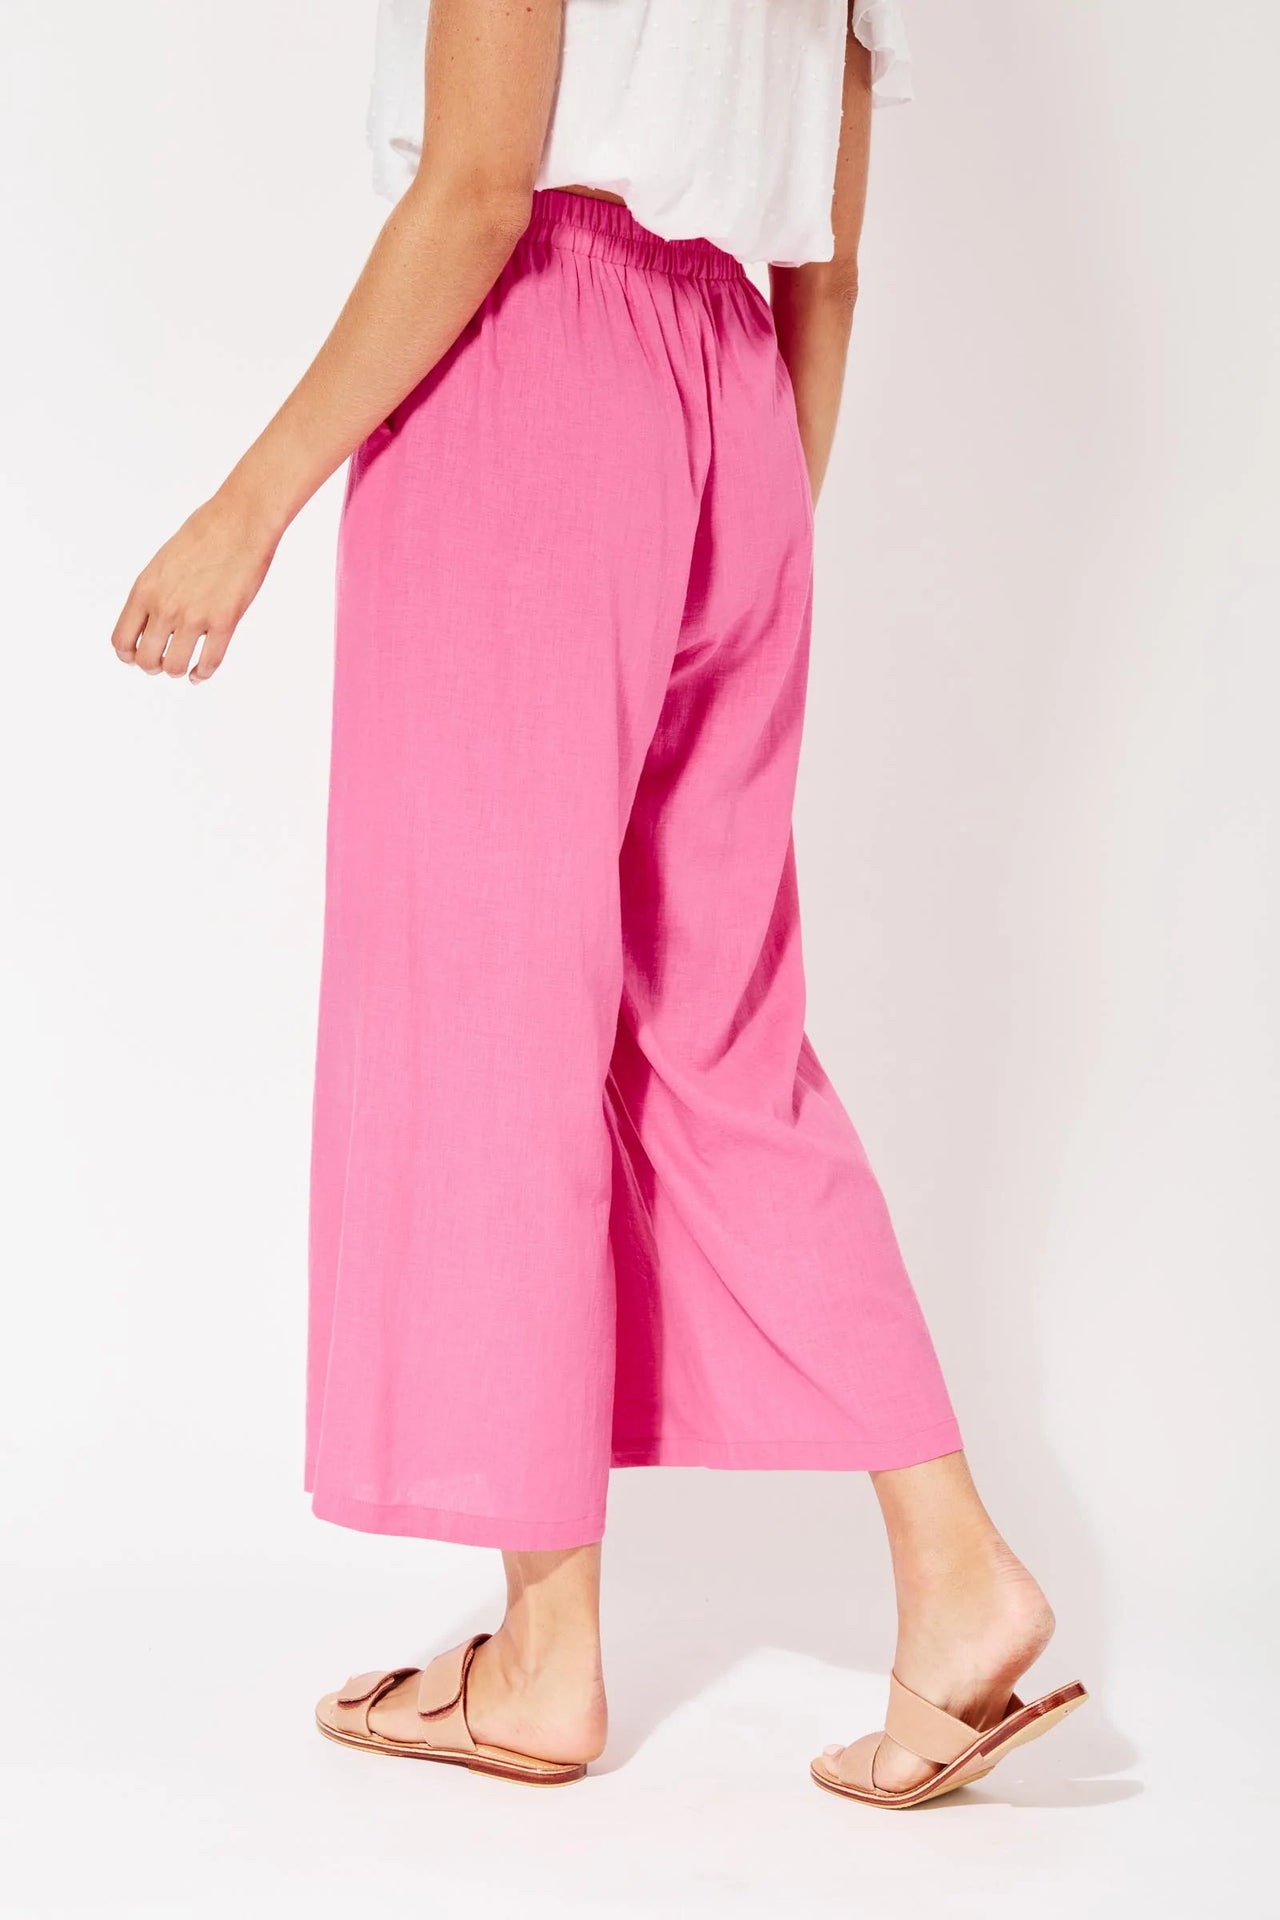 Haven St Barts Flamingo Cropped Trousers